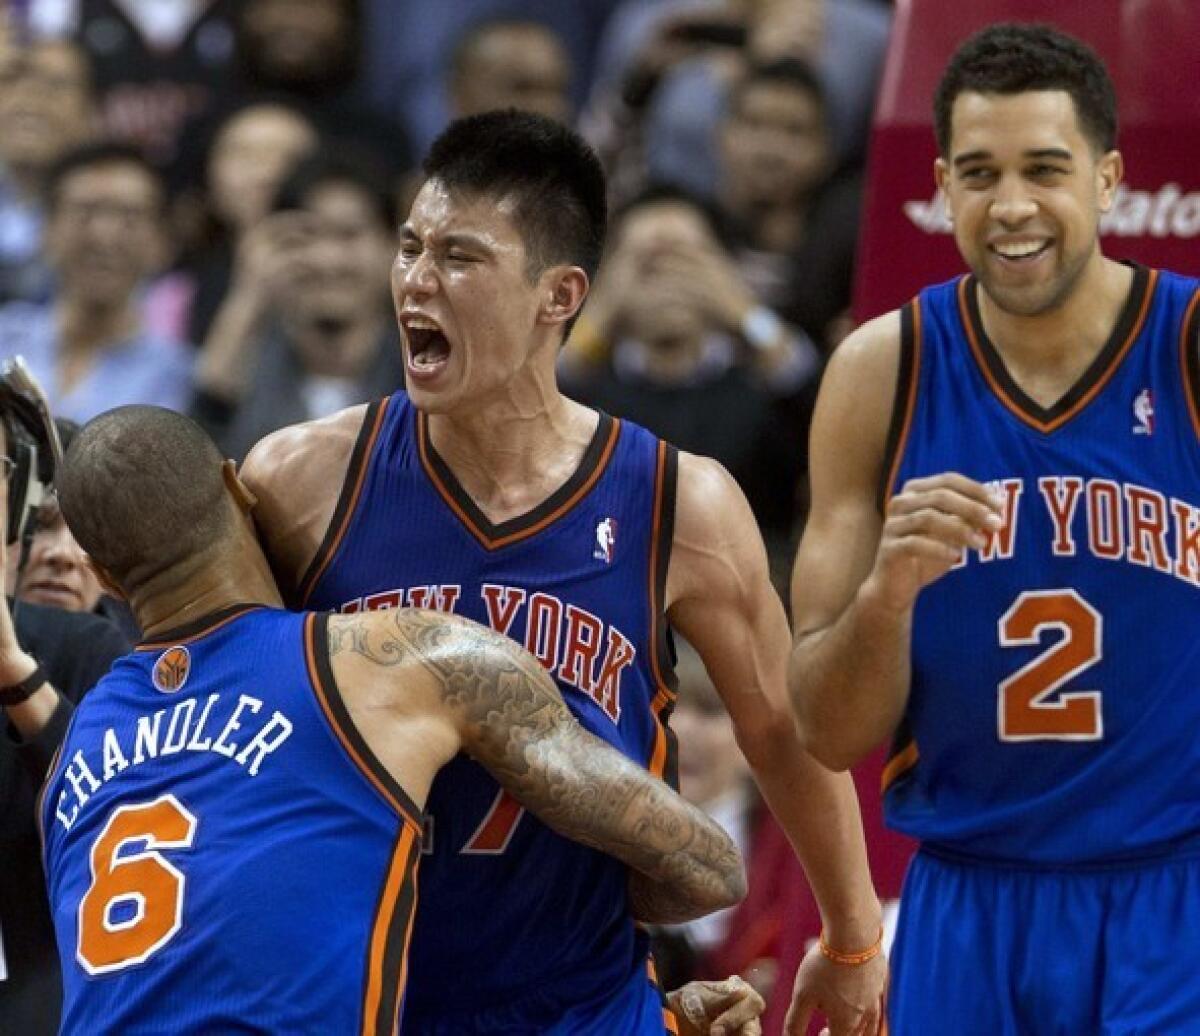 Jeremy Lin, center, celebrates with teammates Tyson Chandler, left, and Landry Fields after hitting a game-winning three-pointer with less than half a second left to lift the Knicks to a 90-87 victory over the Toronto Raptors in February.